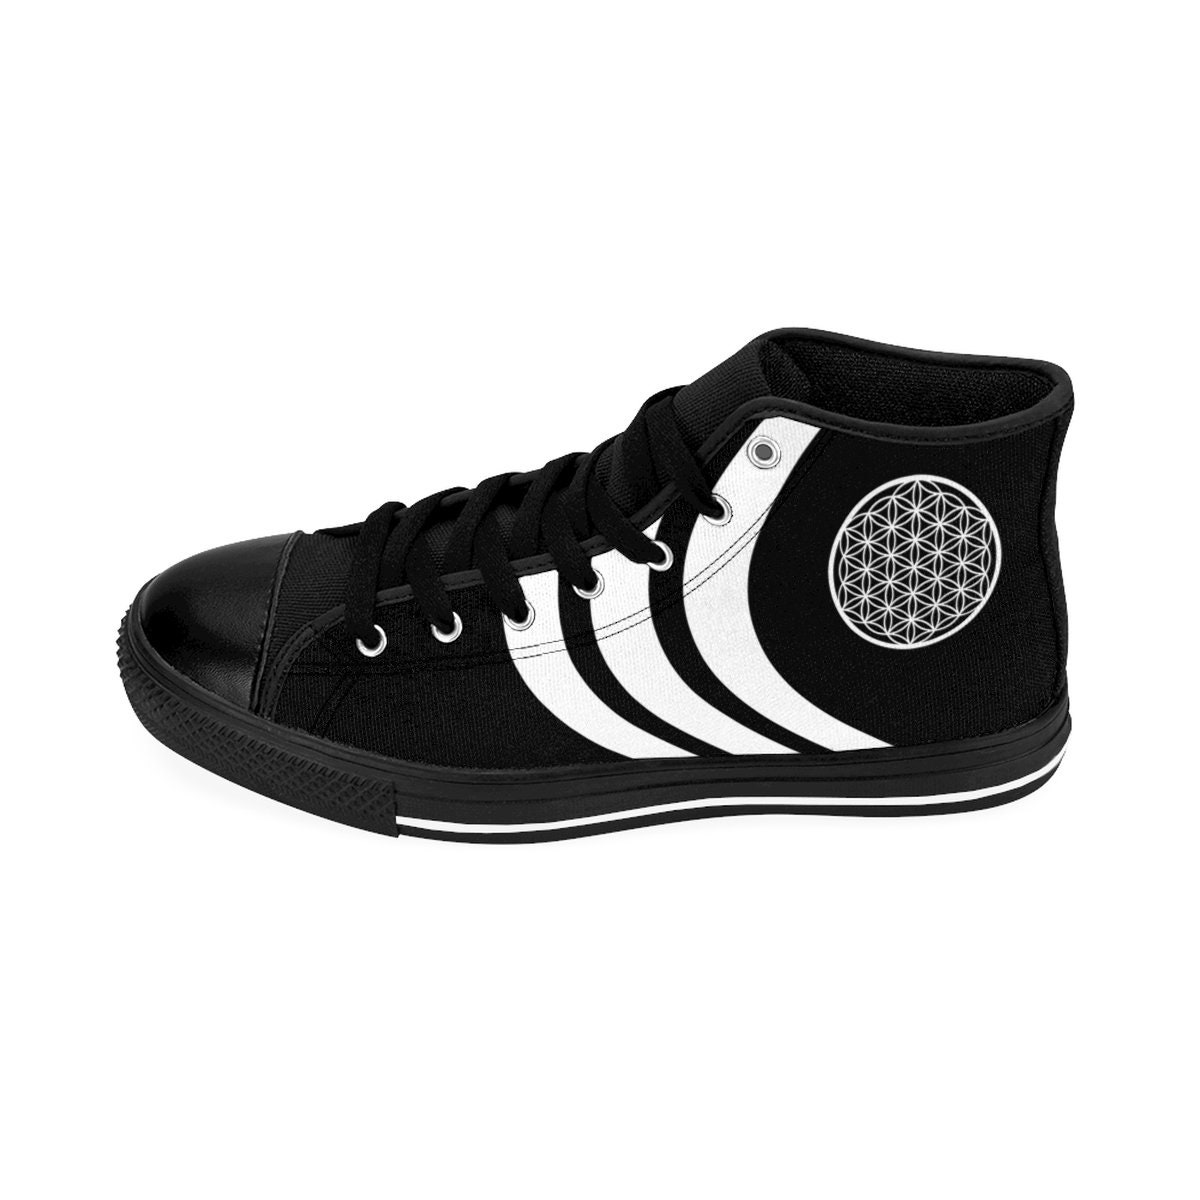 Sacred Geometry Flower of Life Shoes, Canvas Sneakers, Mens Festival Outfit Geometric Black and White Techno Rave Clothing Psytrance Edm